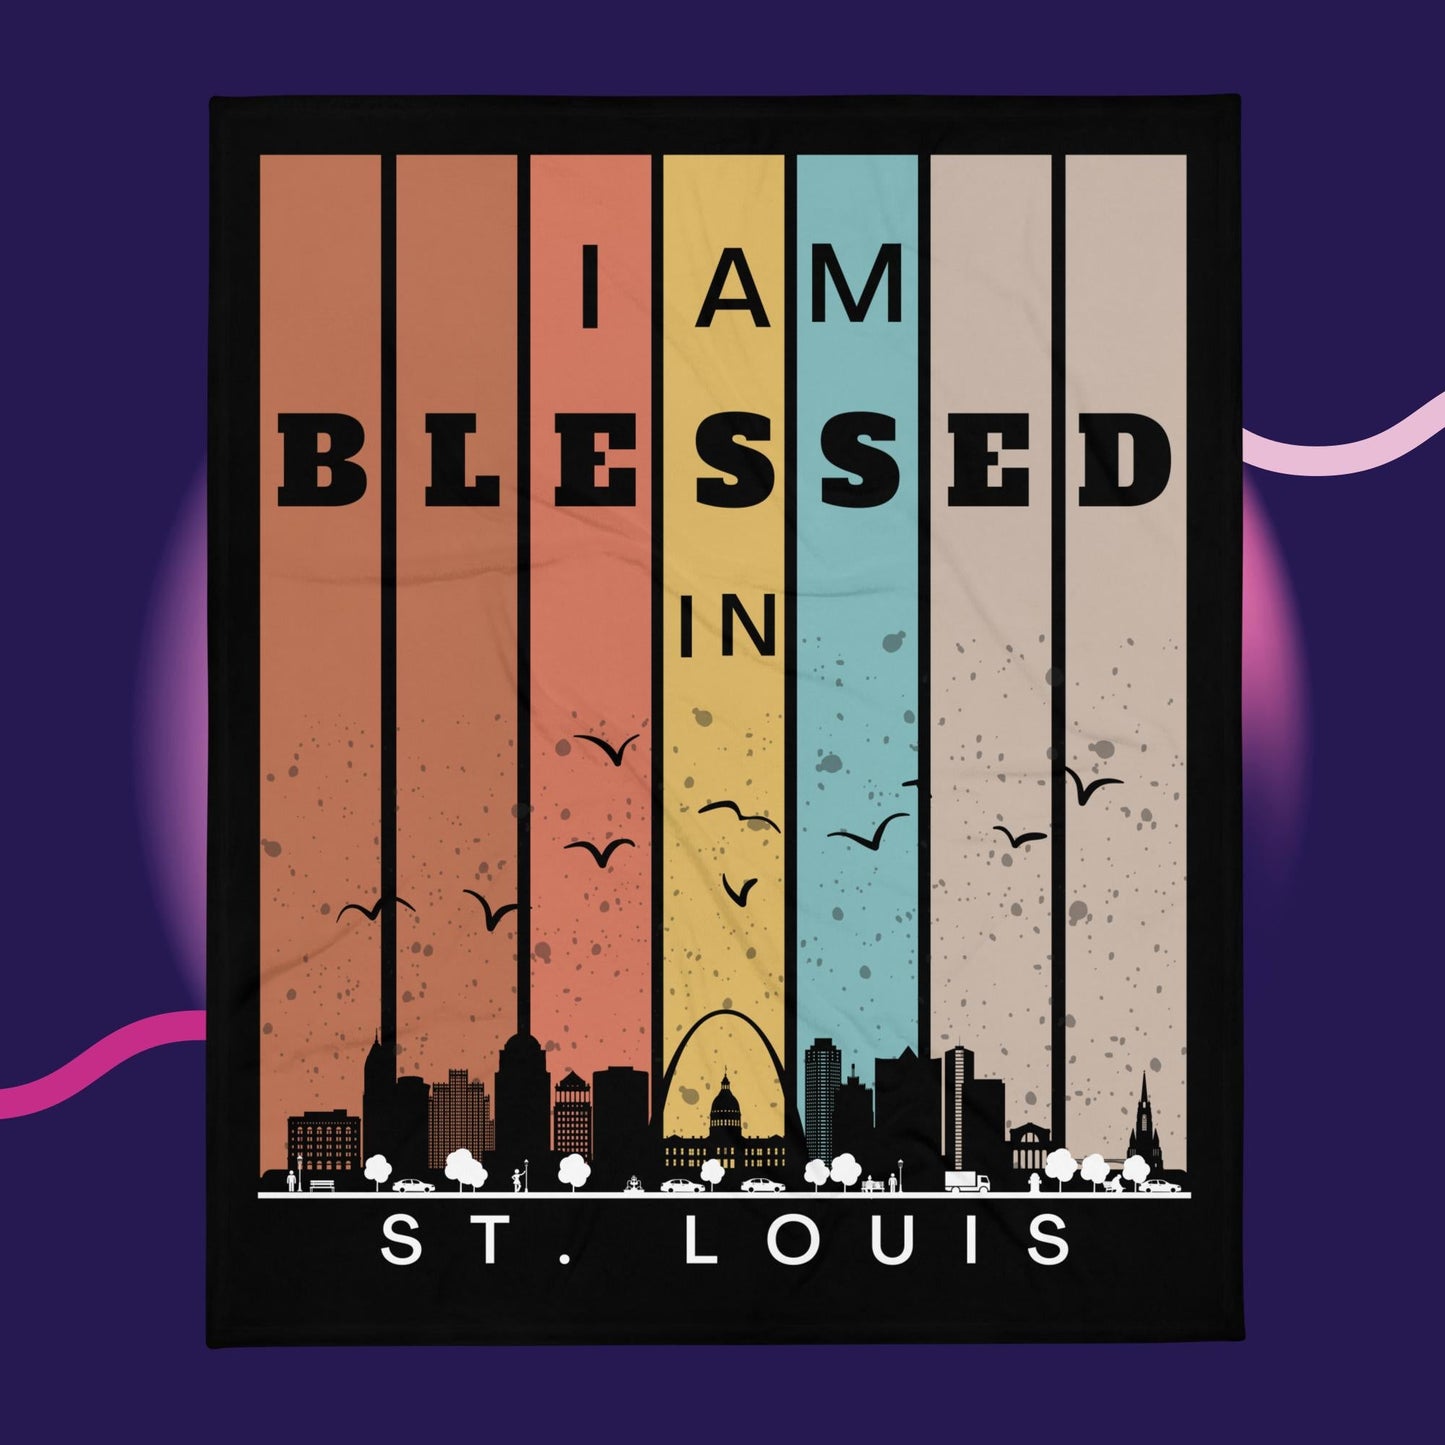 Midwest Retro I AM Blessed City Skylines Throw Blanket Collection-THROW BLANKET-50″×60″-St. Louis-mysticalcherry